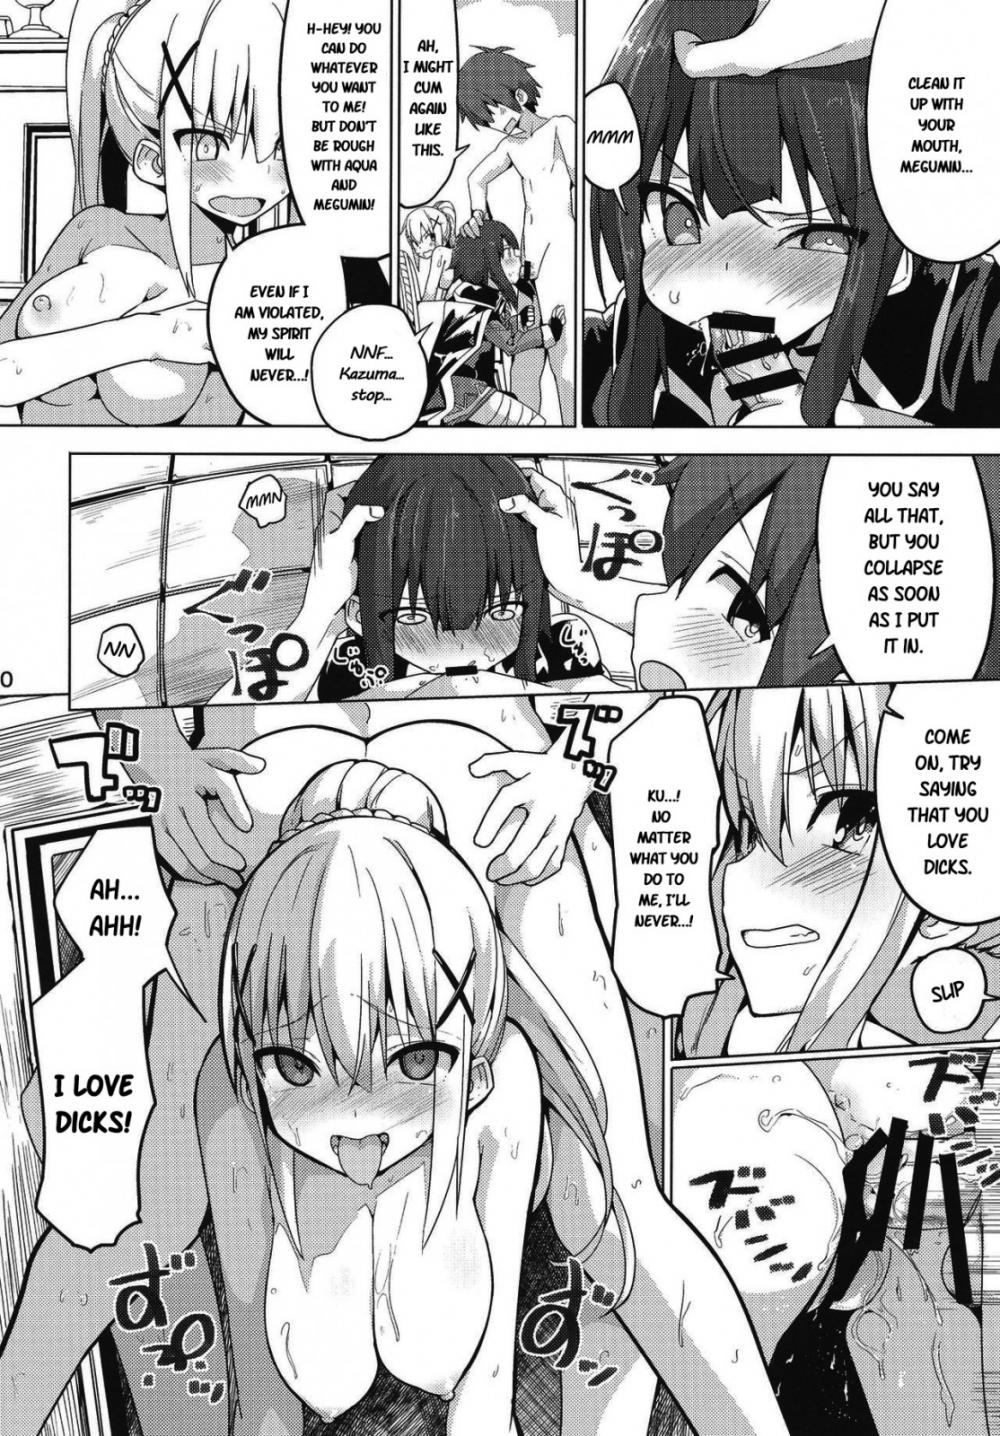 Xxx4d - Pure-hearted Girl Et Cetera-Chapter 2-Hentai Manga Hentai Comic - Page: 7 -  Online porn video at mobile